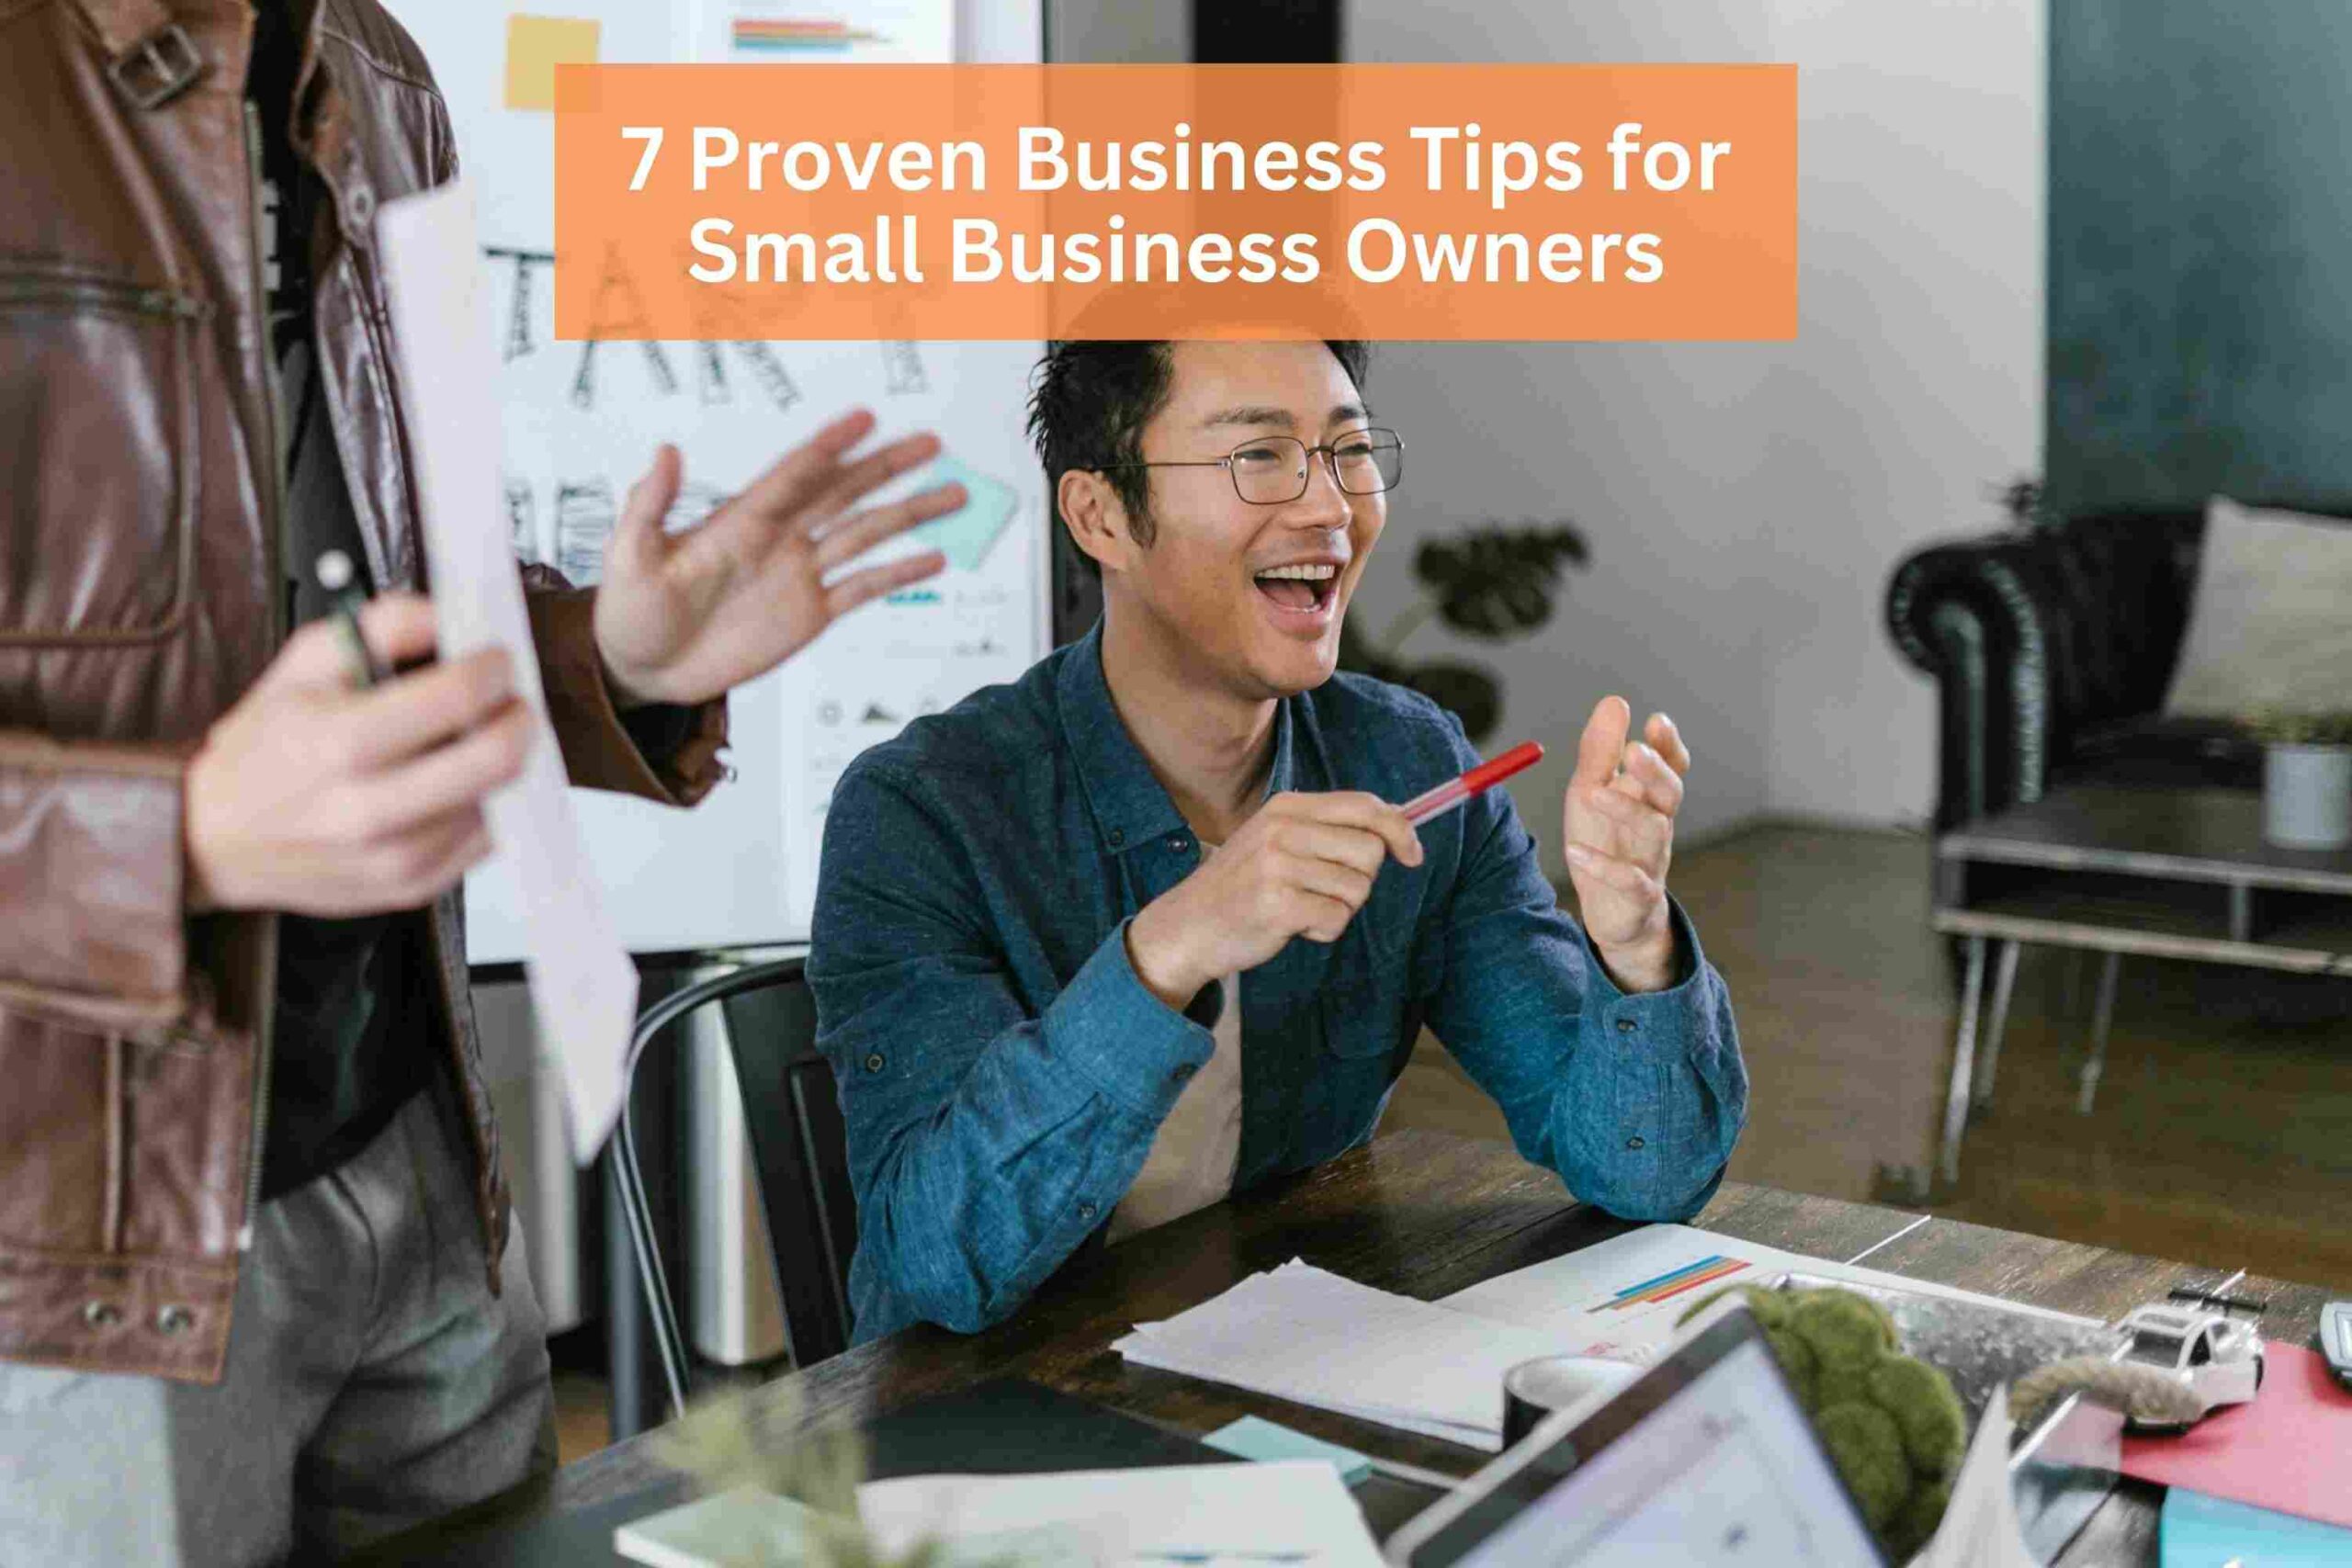 7 Proven Business Tips for Small Business Owners